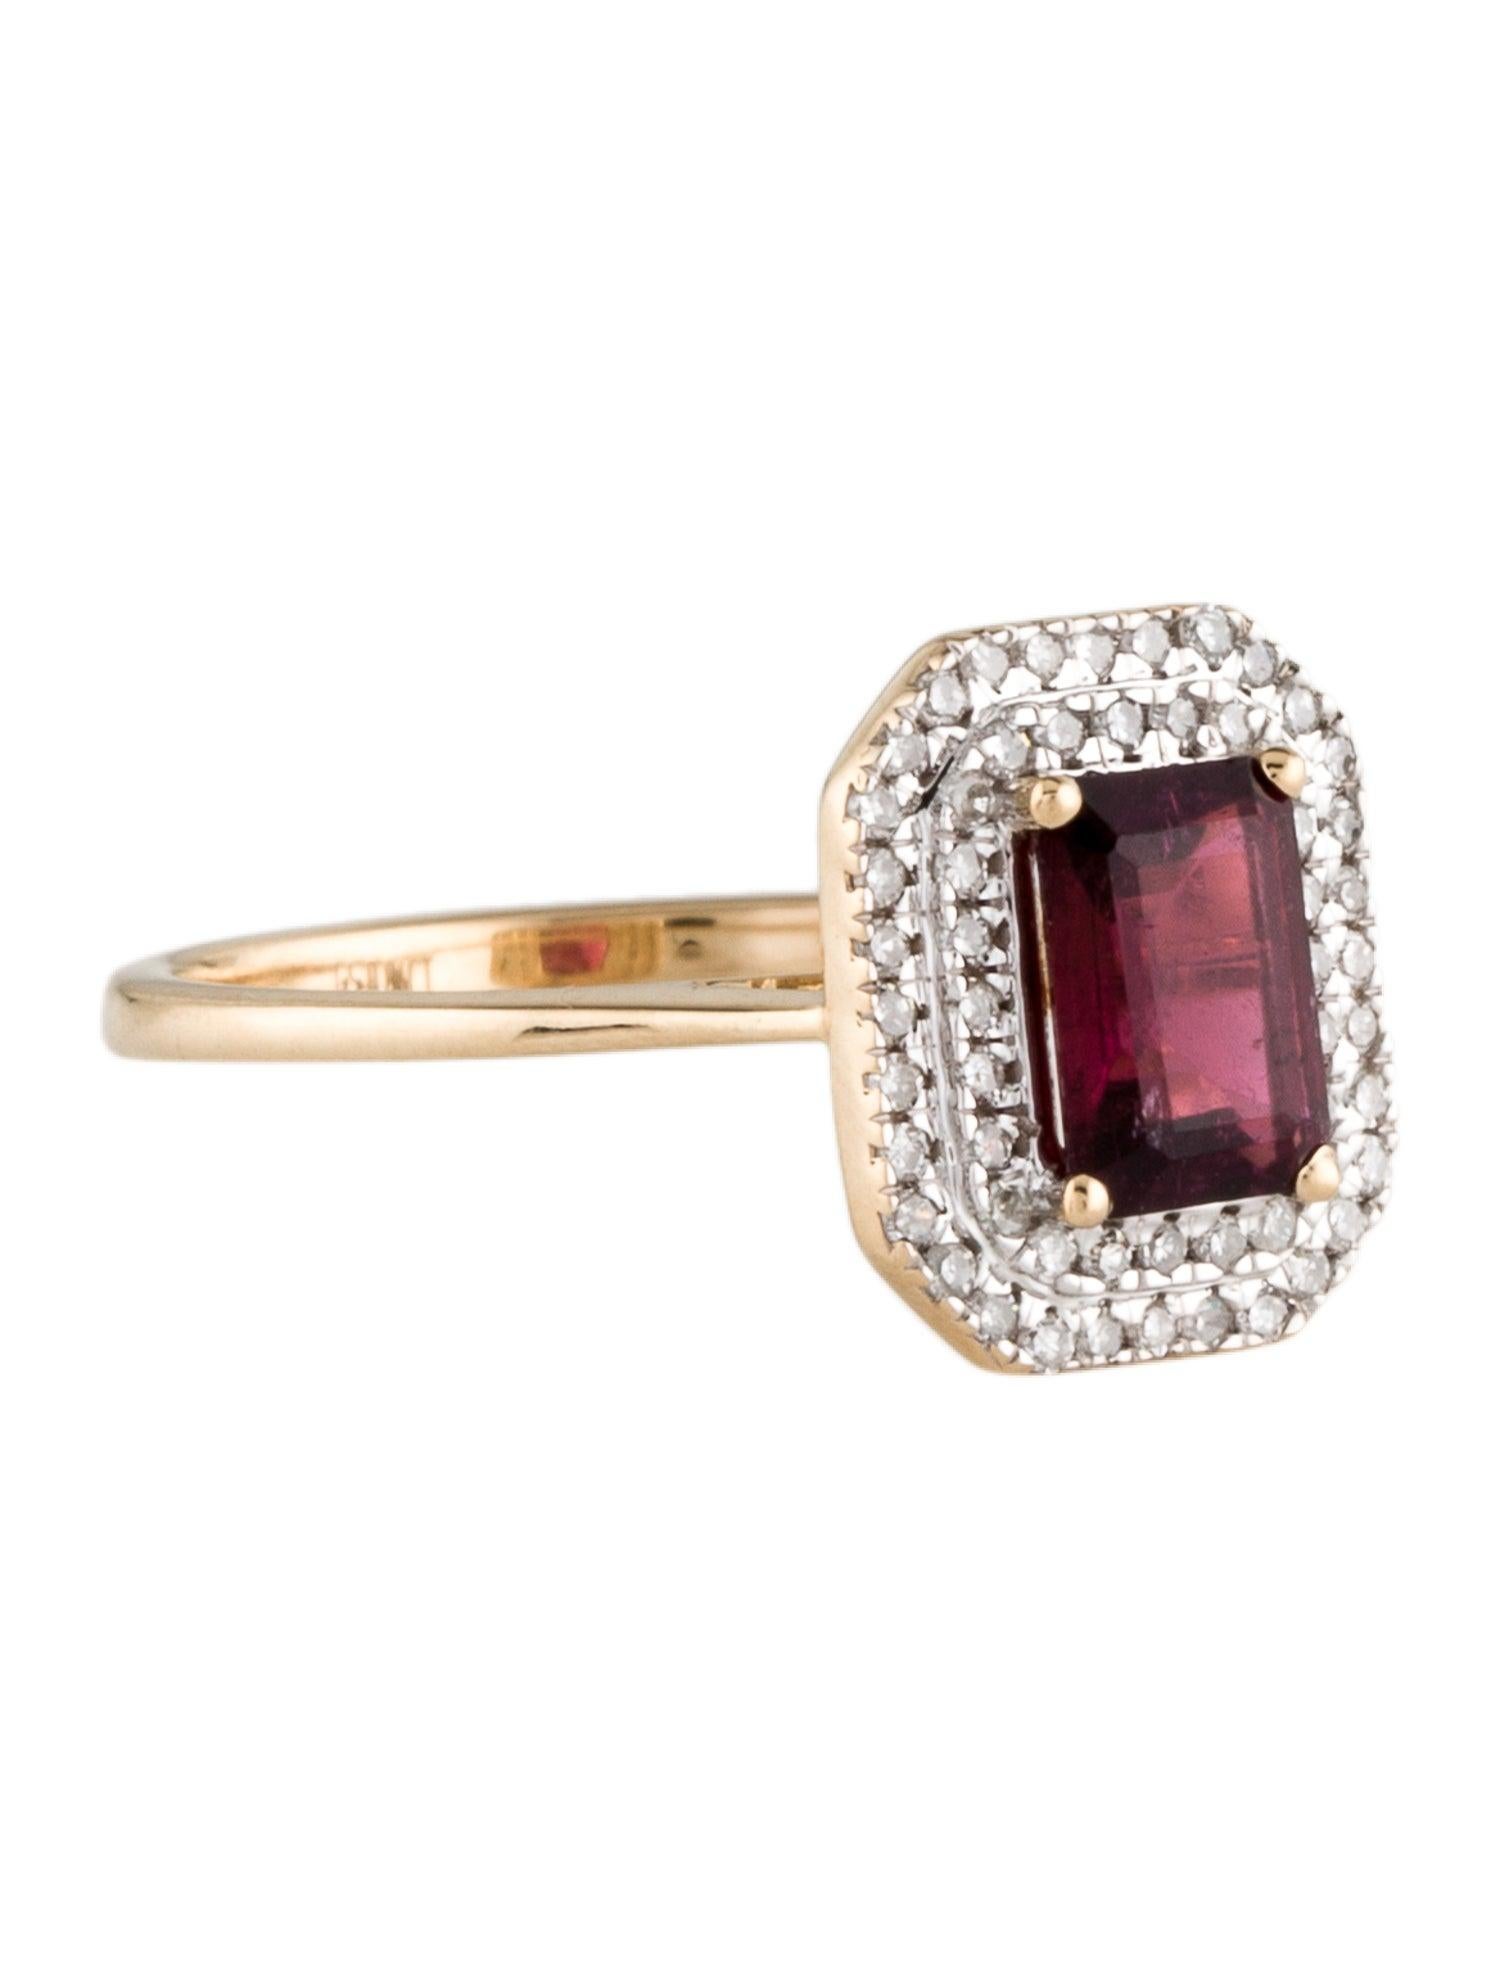 Elegance meets the brilliance of nature in our 'Rose Radiance' Rubellite and Diamond Octagon Ring, a masterpiece from Jeweltique's Vibrant Pink Treasures collection. Crafted with precision and passion, this ring is a tribute to the enchanting beauty